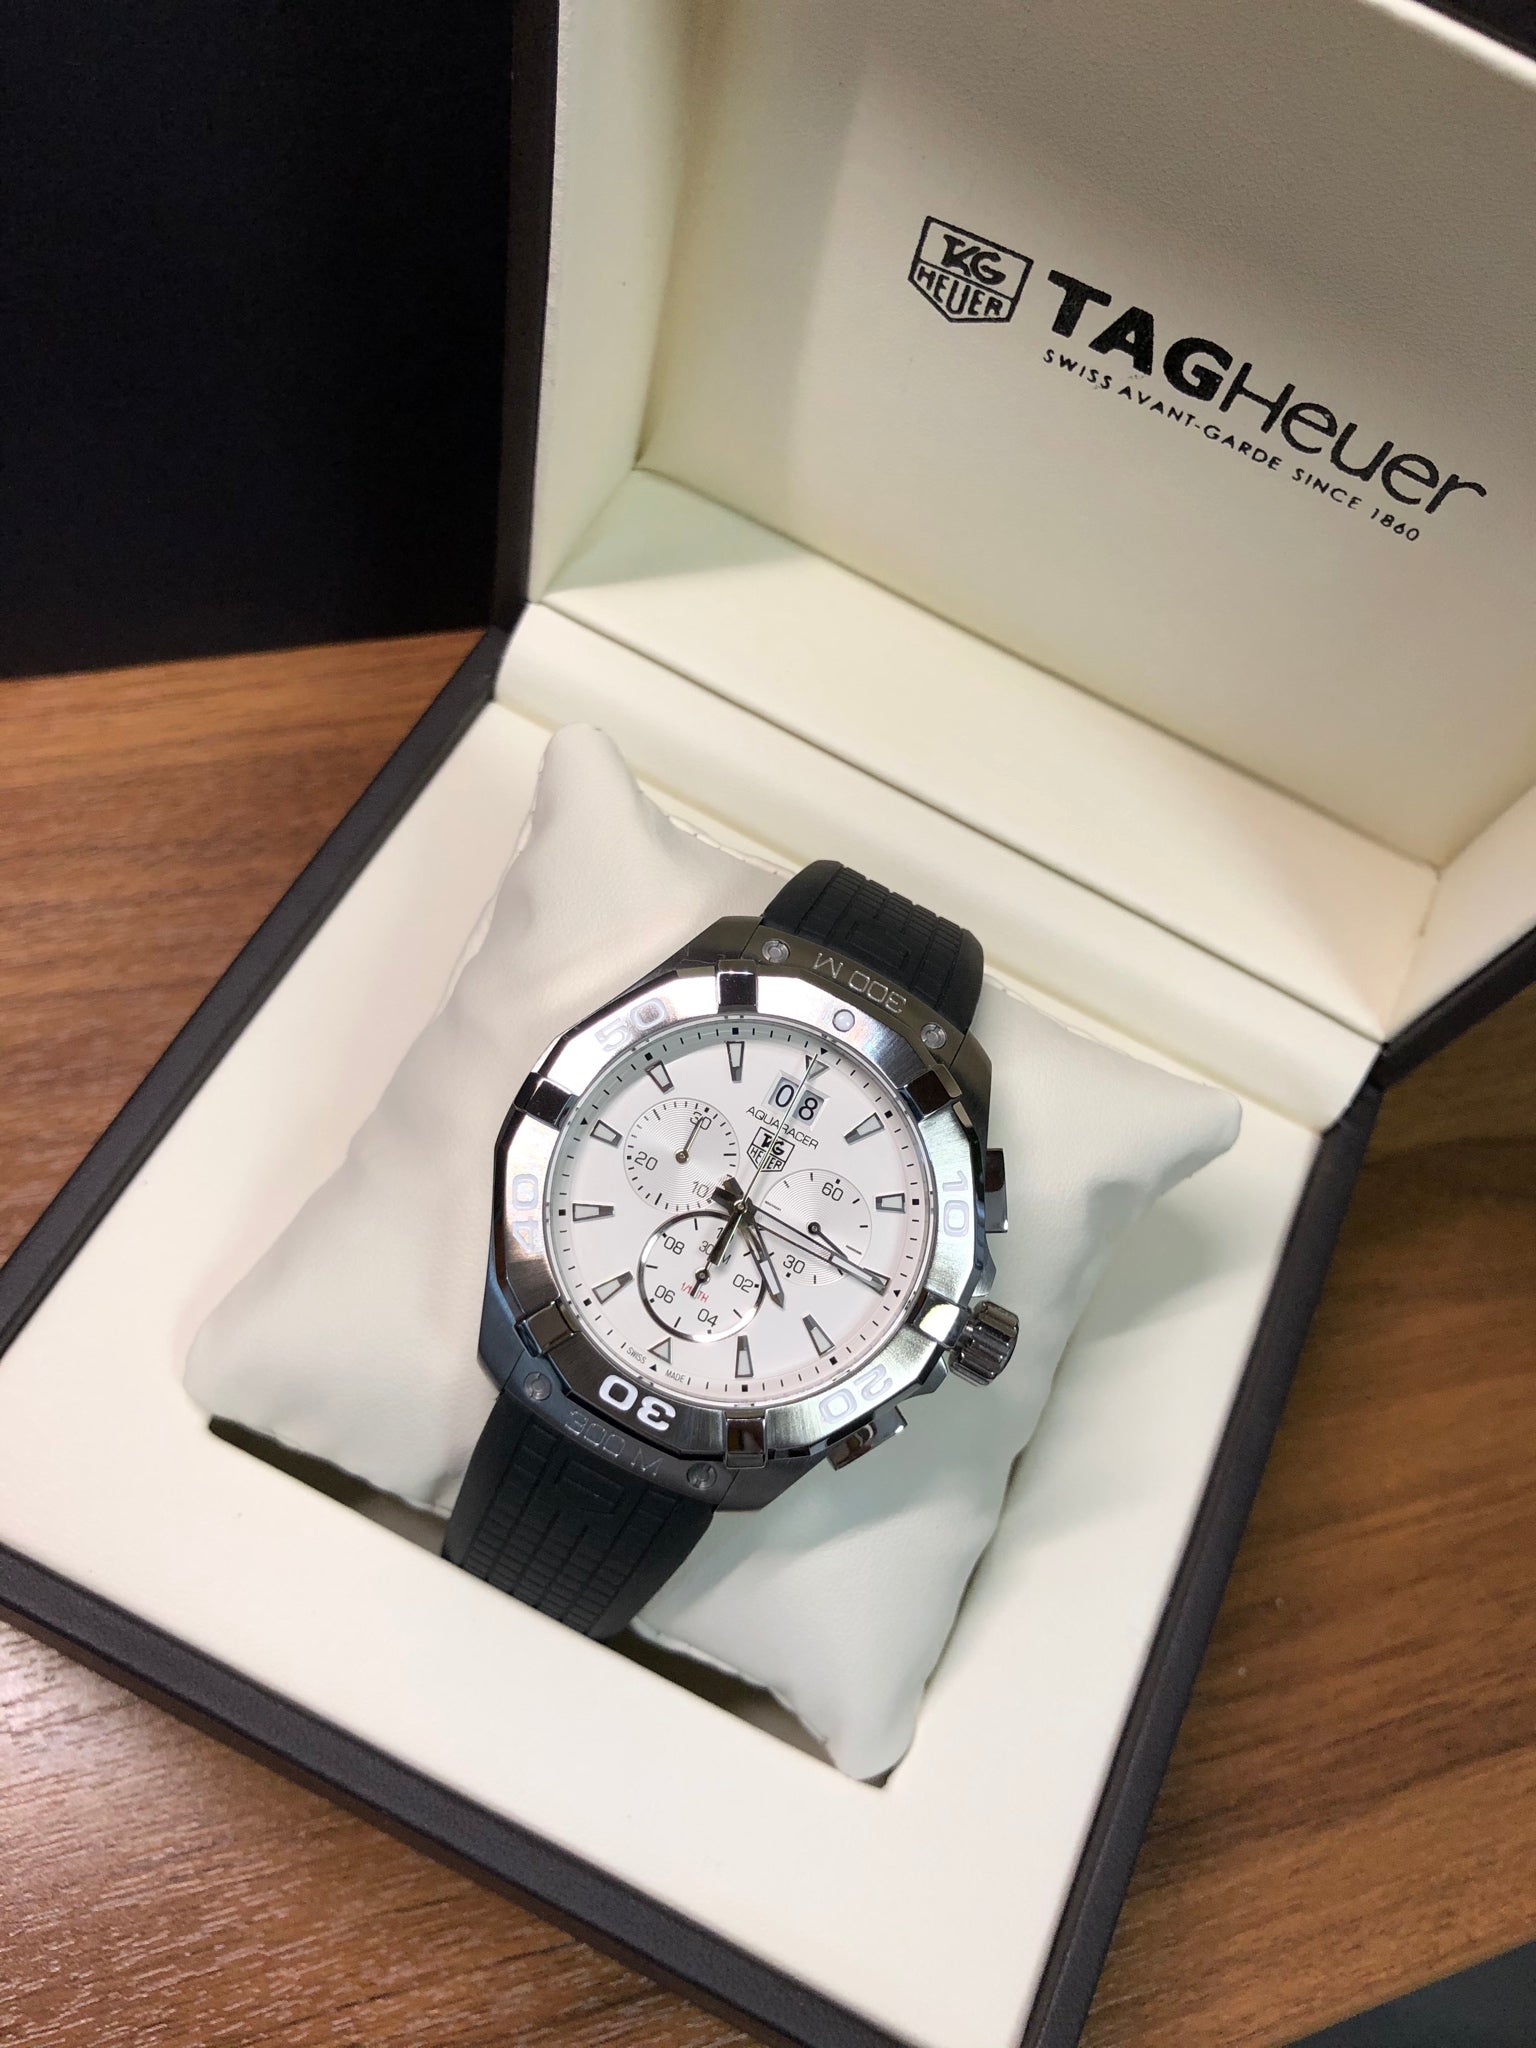 Tag Heuer Aquaracer Chronograph White Dial Black Rubber Strap Watch for Men - CAY1111.FT6041